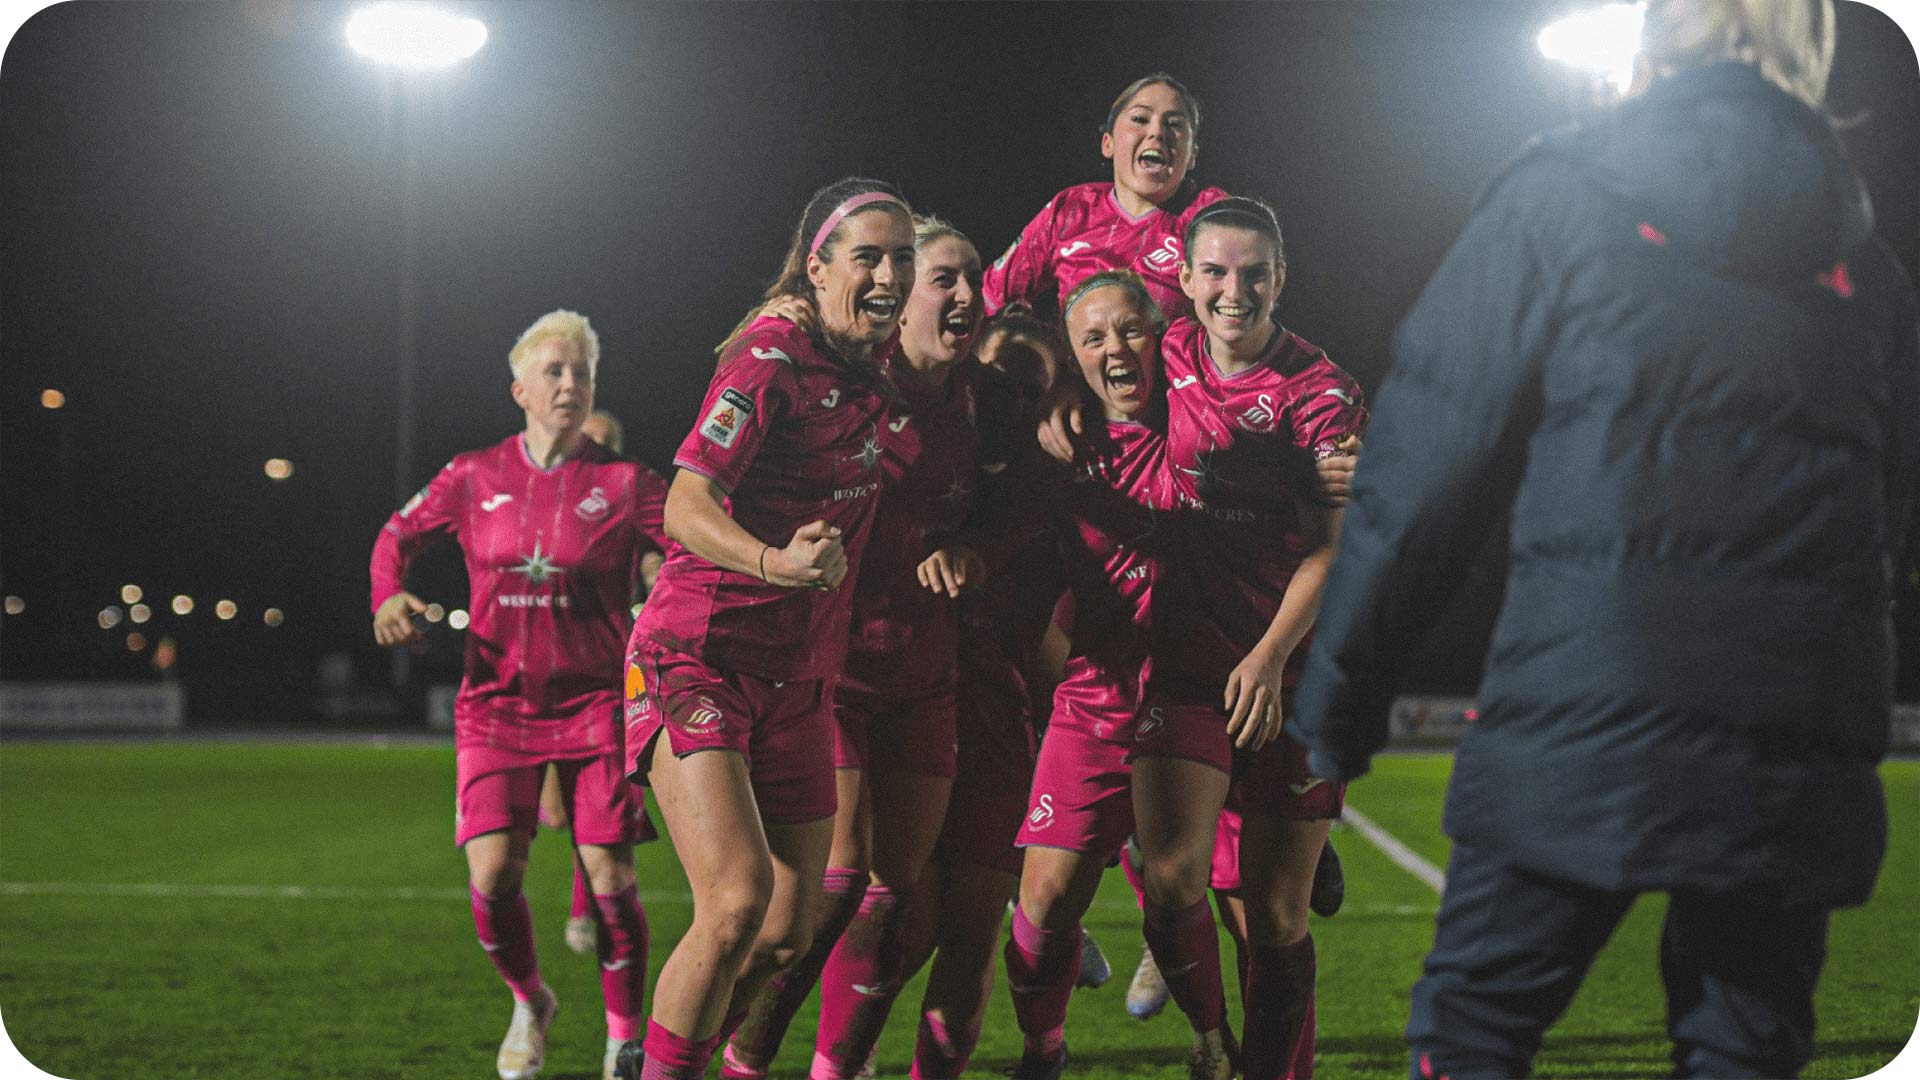 Photograph of the Women's team celebrating.